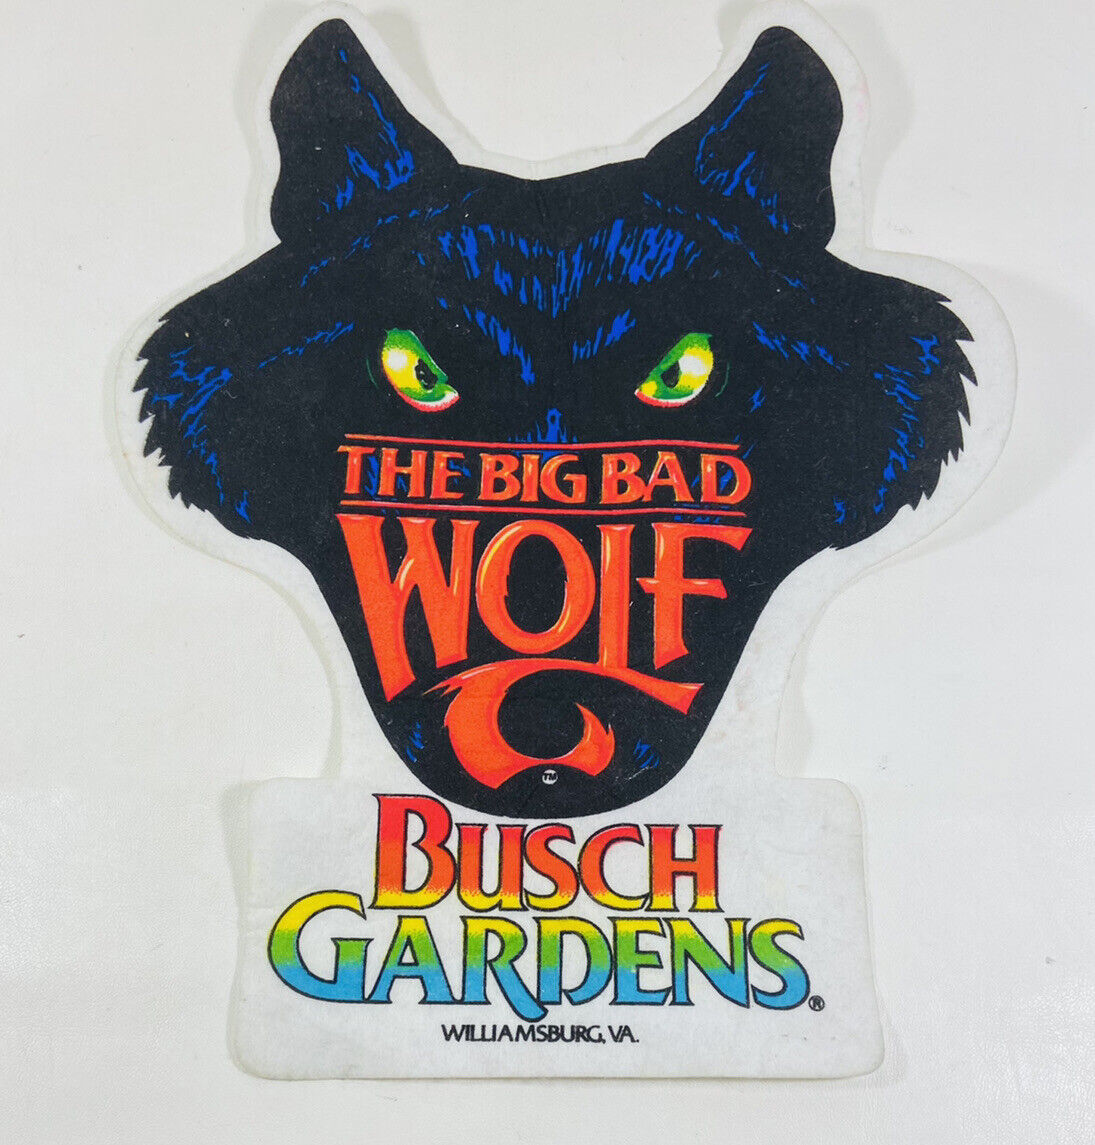 The Big Bad Wolf Busch Gardens Roller Coaster Vintage Pin Button Speed of Fright